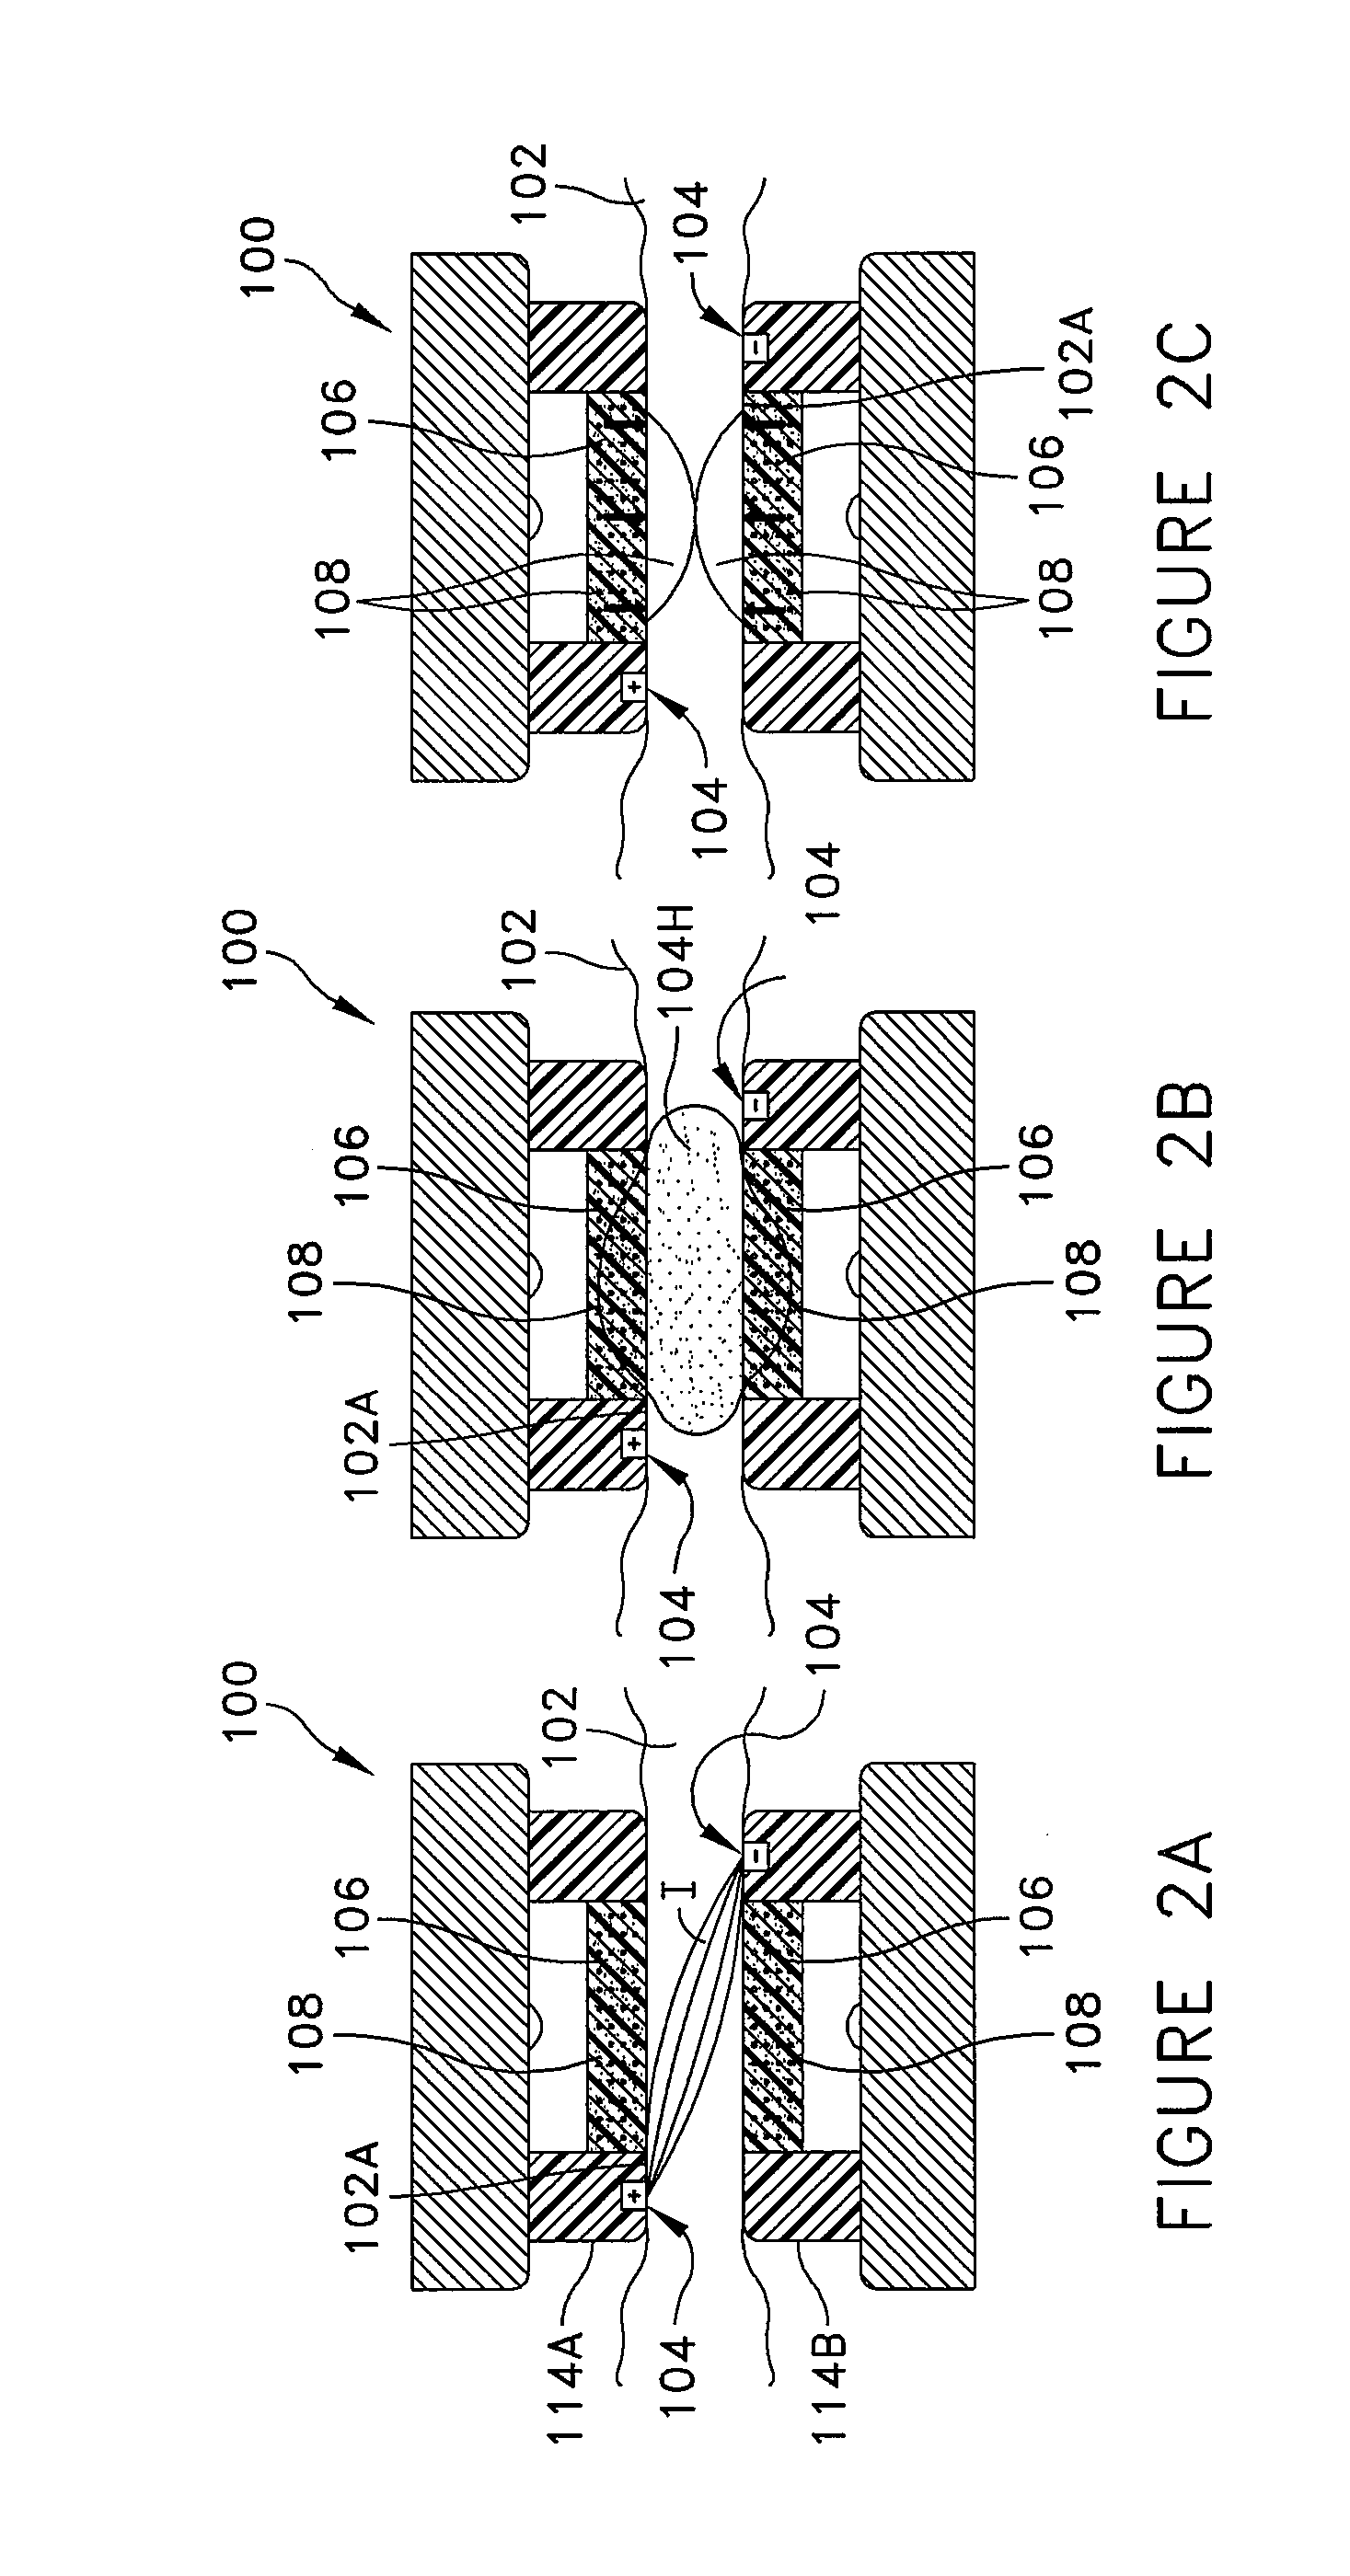 Apparatus for attachment and reinforcement of tissue, apparatus for reinforcement of tissue, methods of attaching and reinforcing tissue, and methods of reinforcing tissue